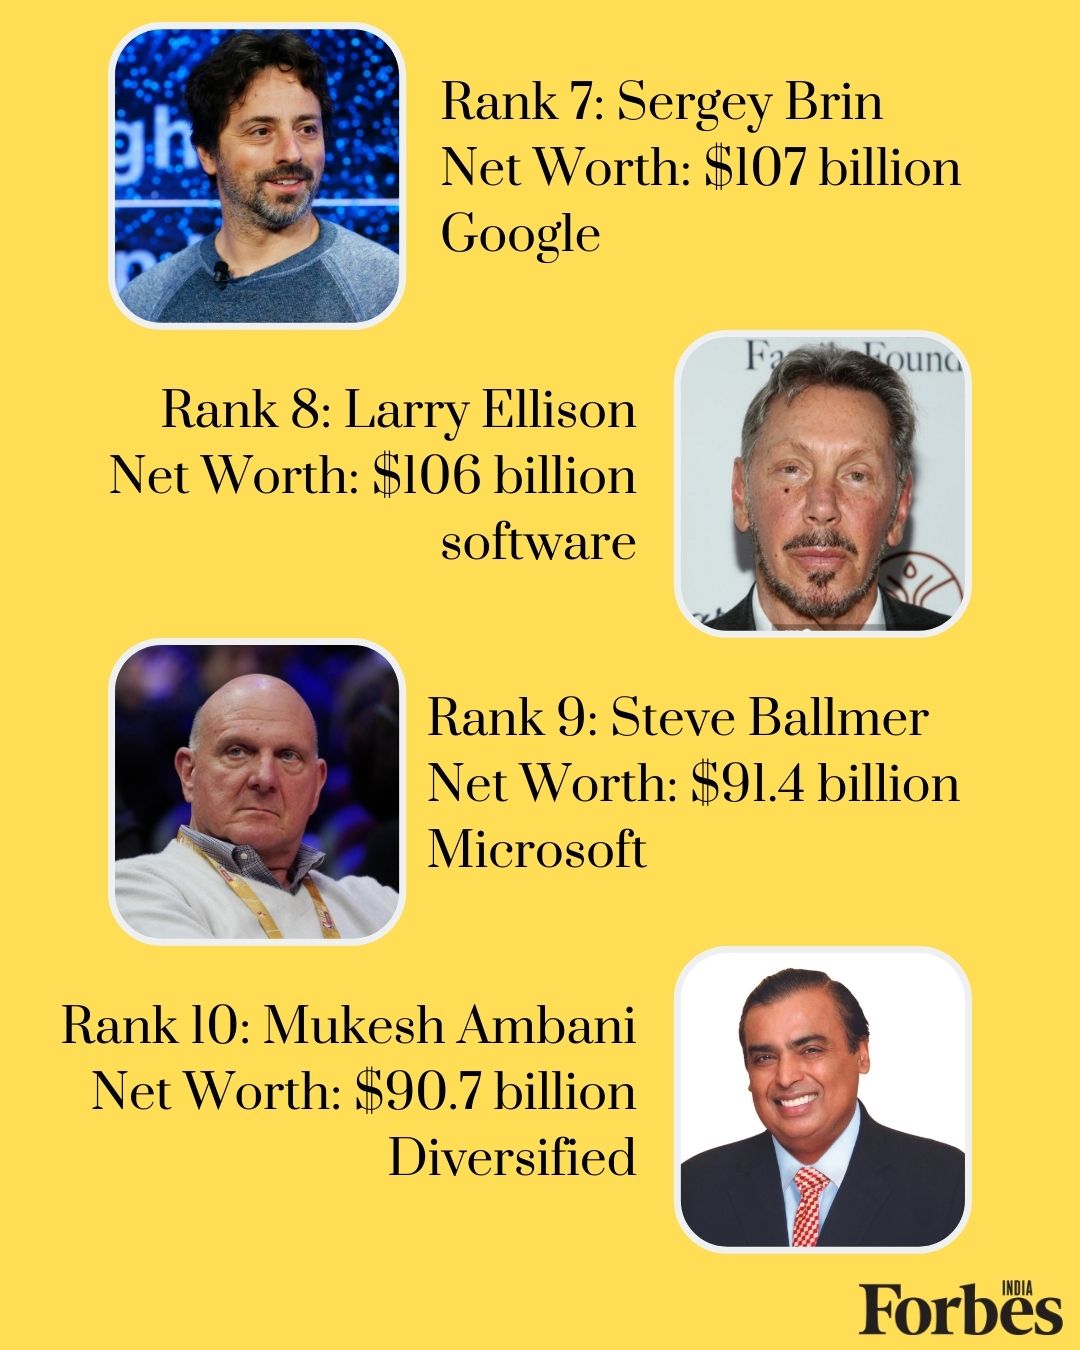 Elon Musk unseats Jeff Bezos as richest person; fewer billionaires in the world today